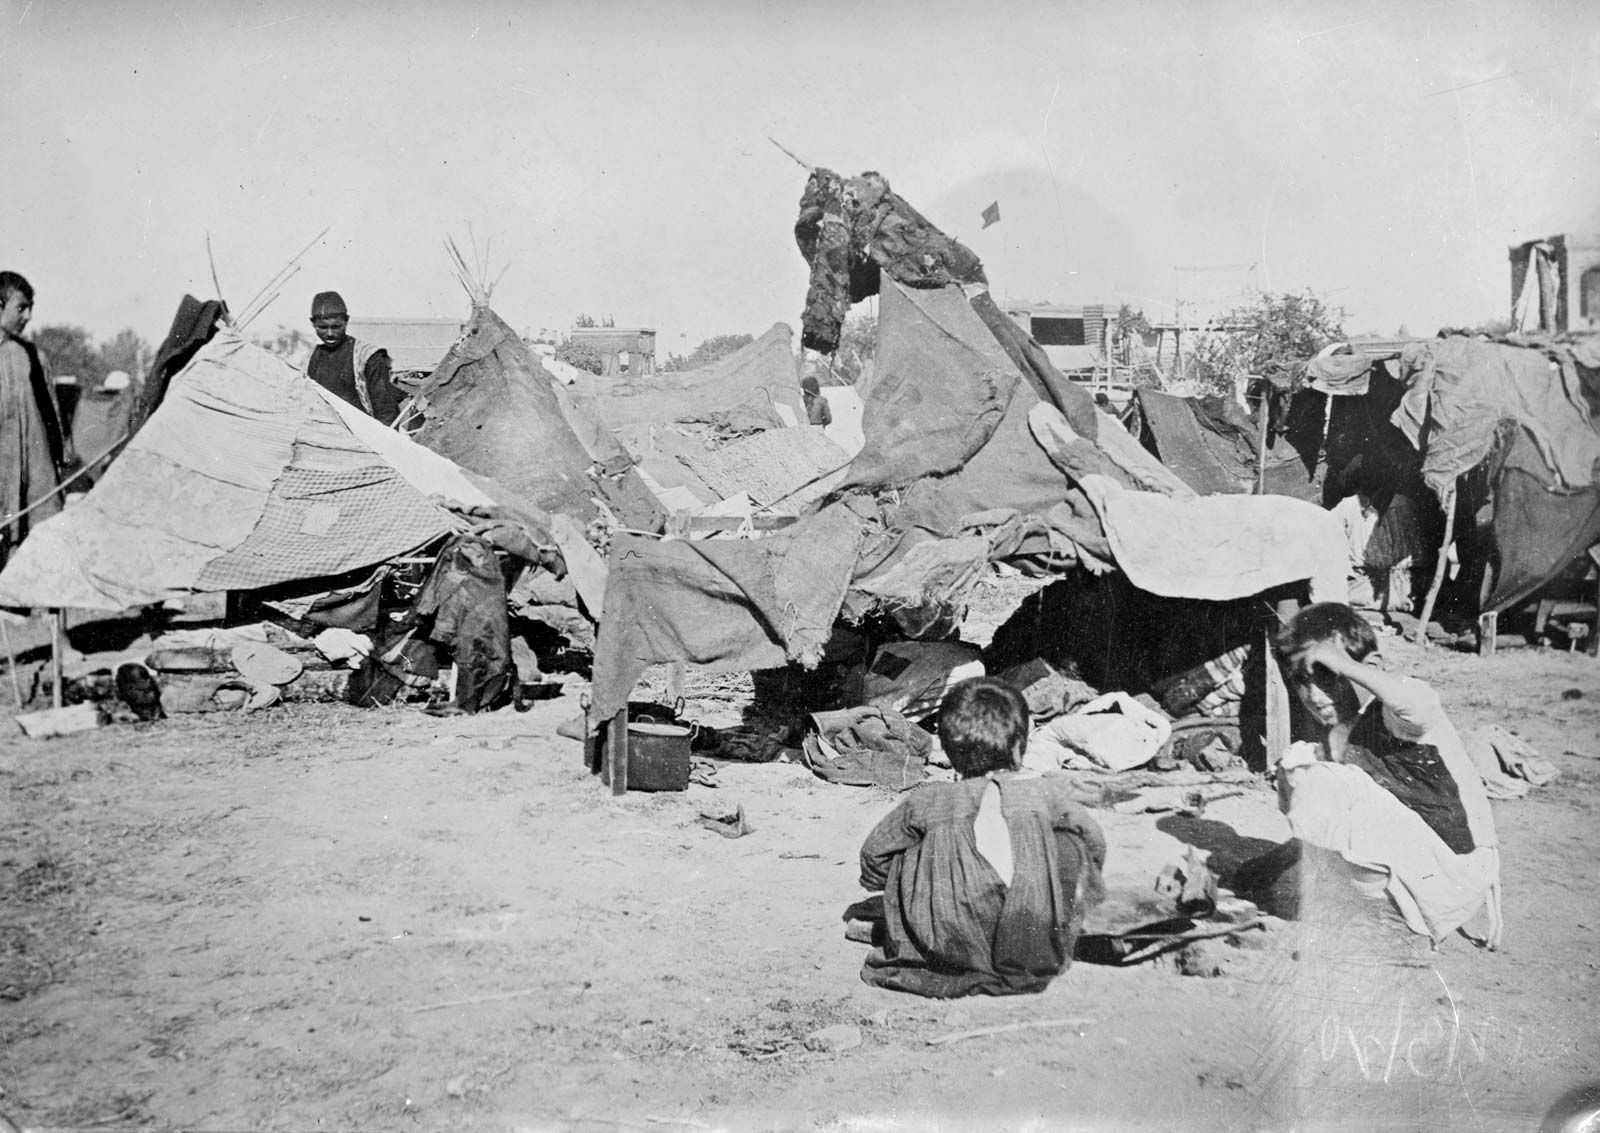 An Armenian refugee camp in the Caucasus, 1920